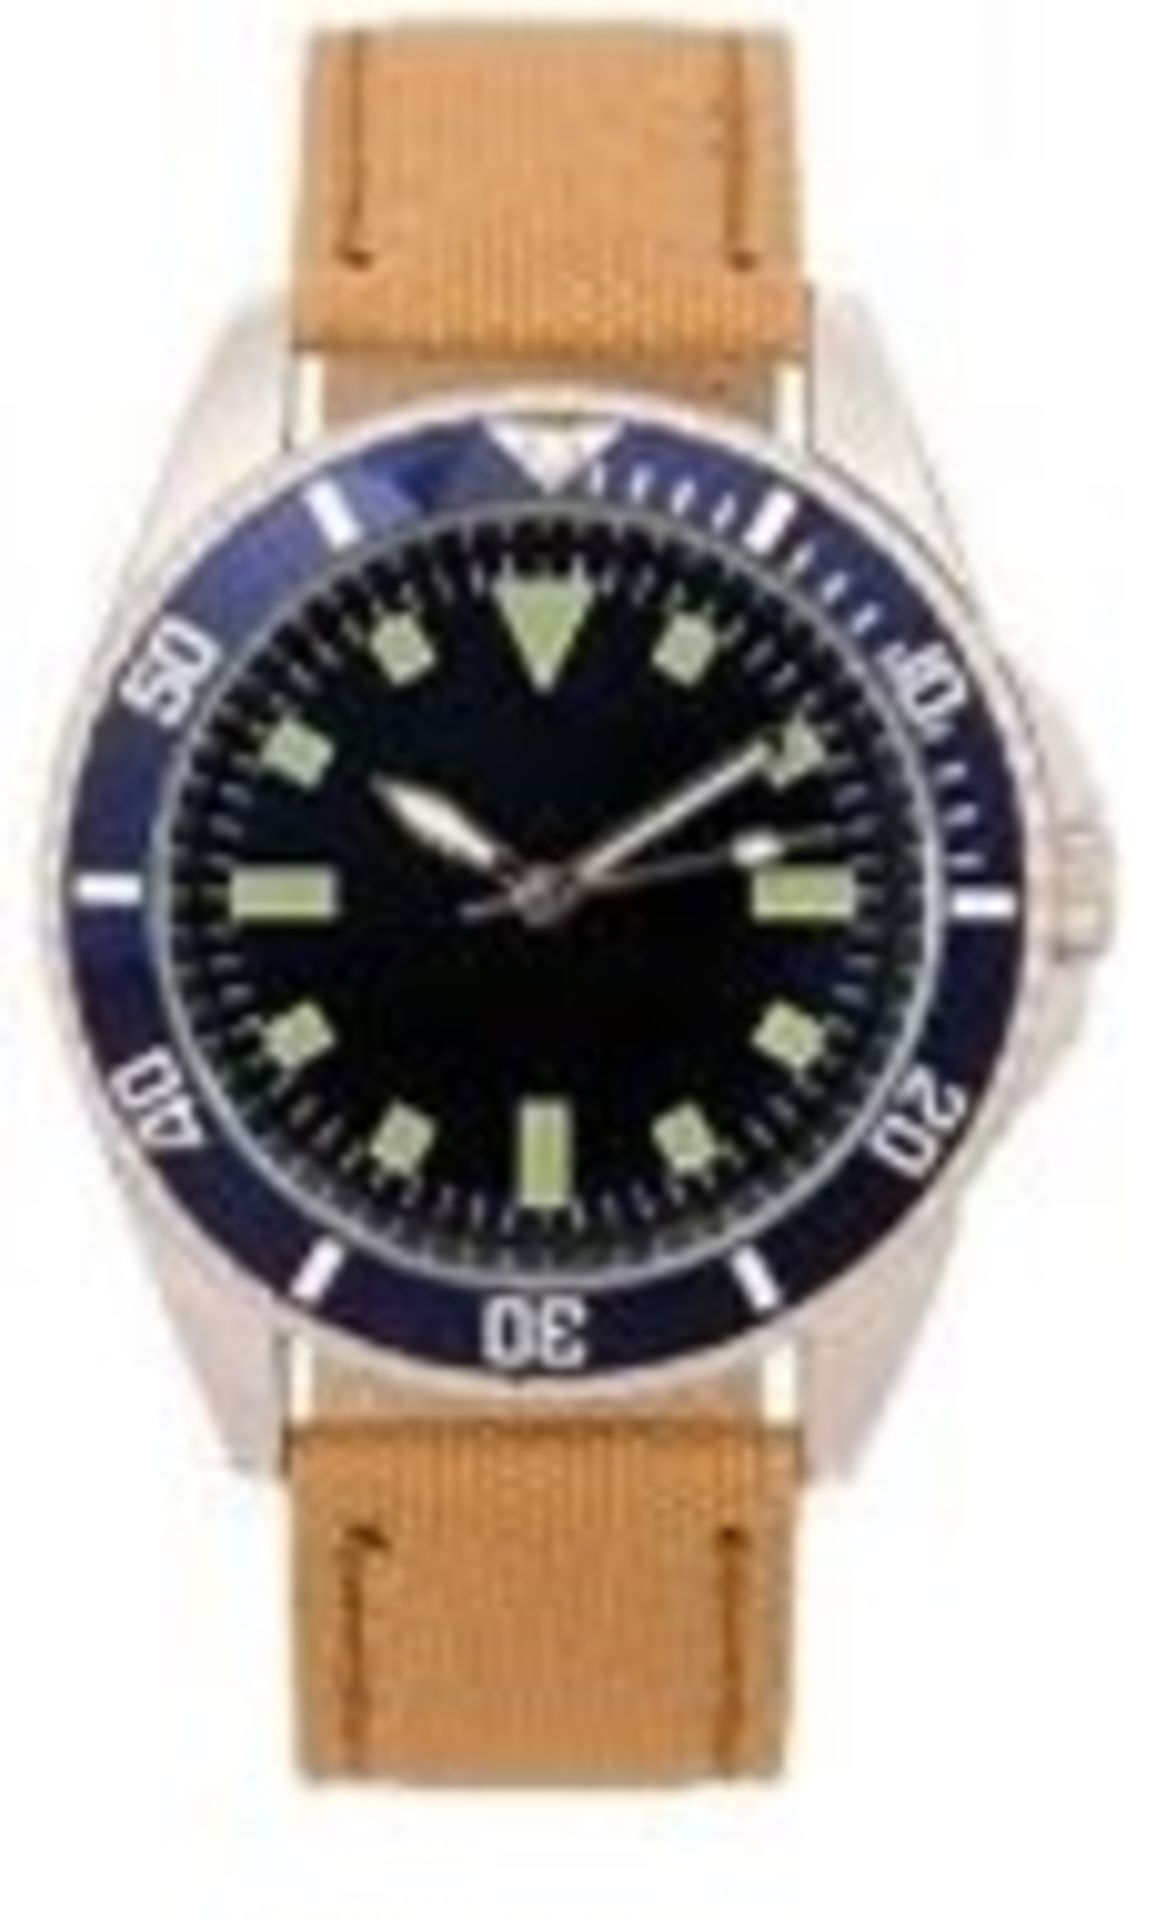 V Brand New Gents 1980s French Naval Diver Watch with Engraved Back in Presentation Box